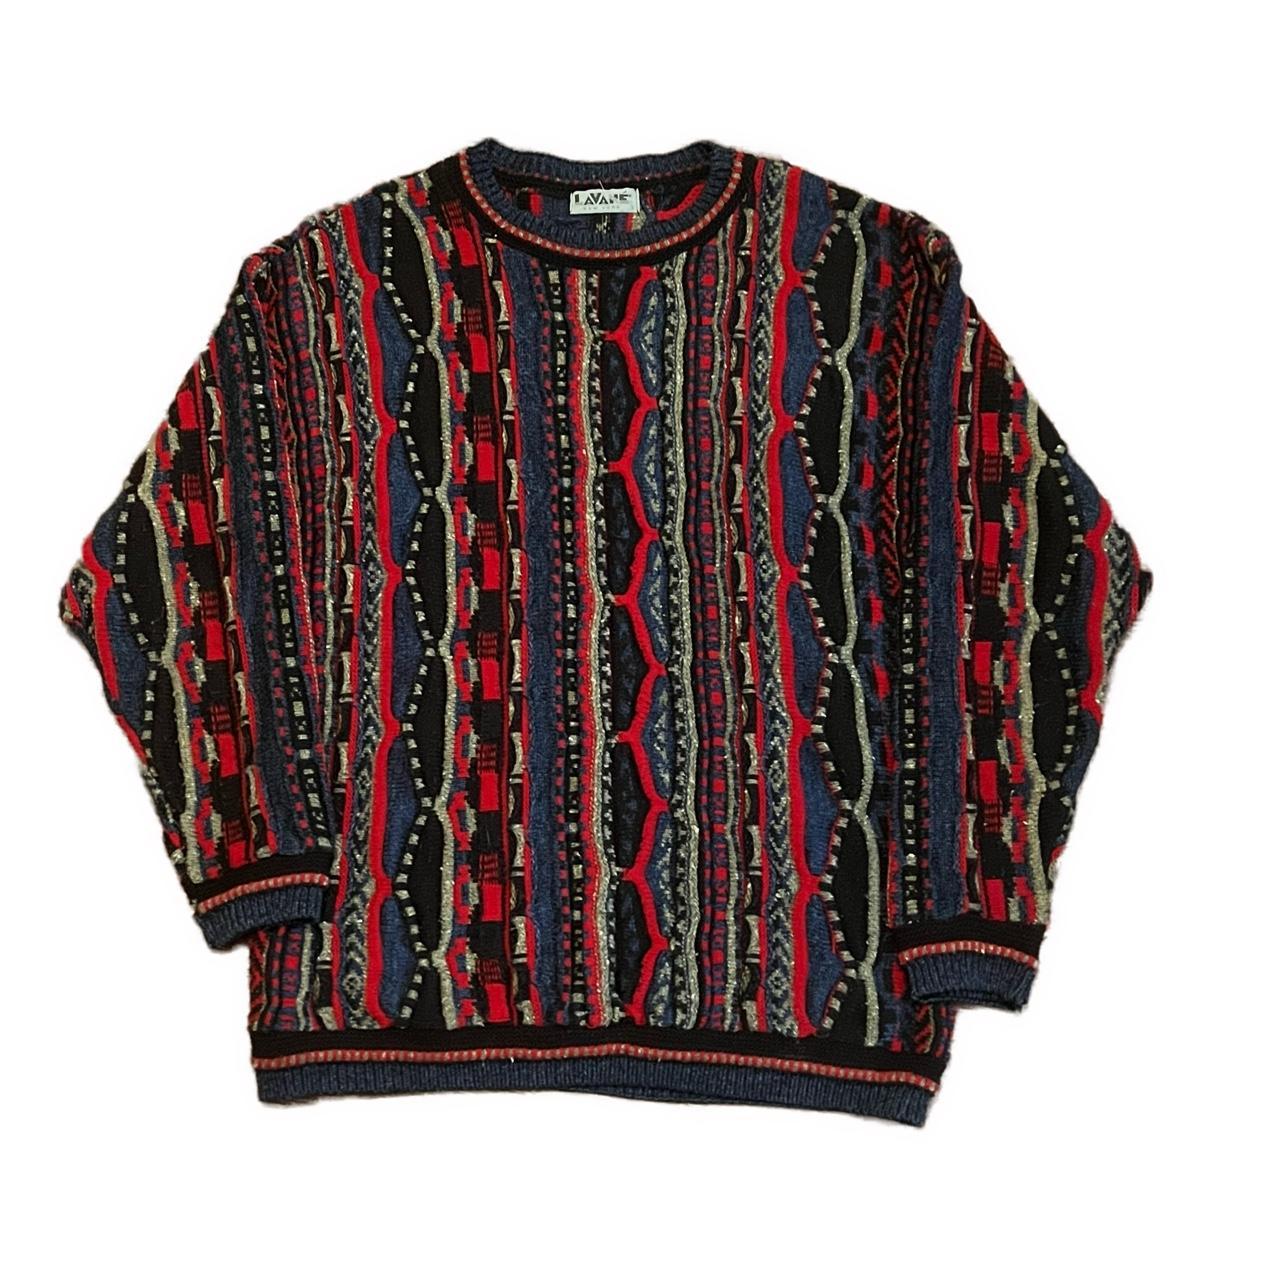 Vintage coogi 3d style sweater by lavane Thick and... - Depop